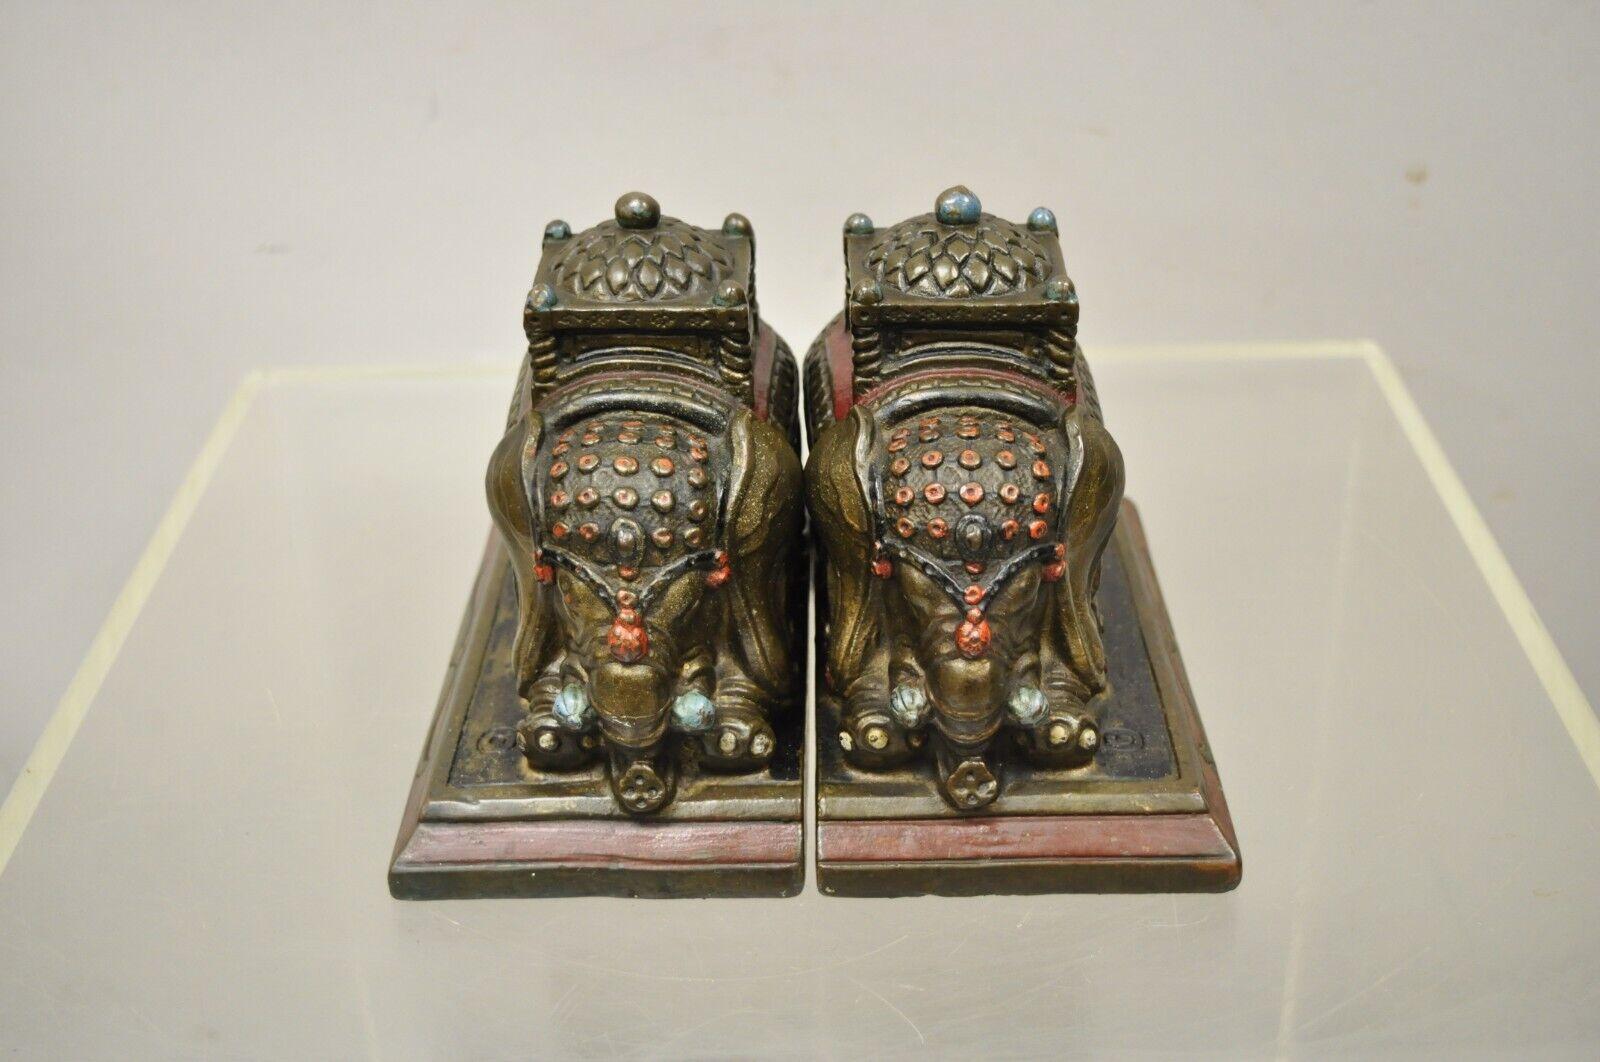 Antique Armor Bronze Indian Elephant Metal Clad Bookends, a Pair 5